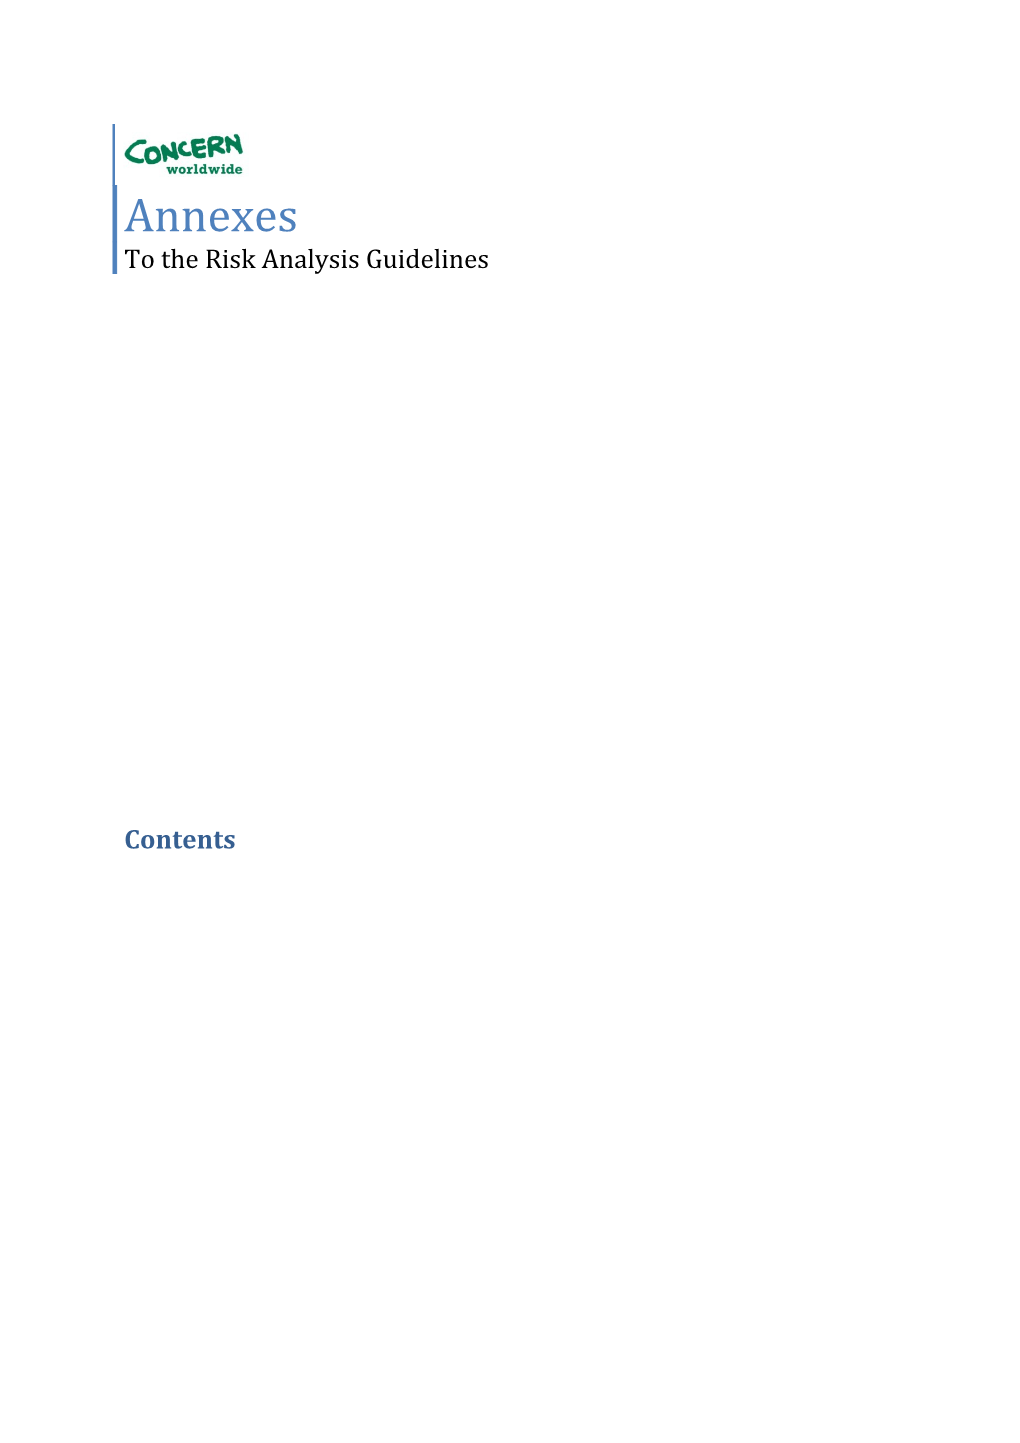 Risk Analysis Guidelines Annexes